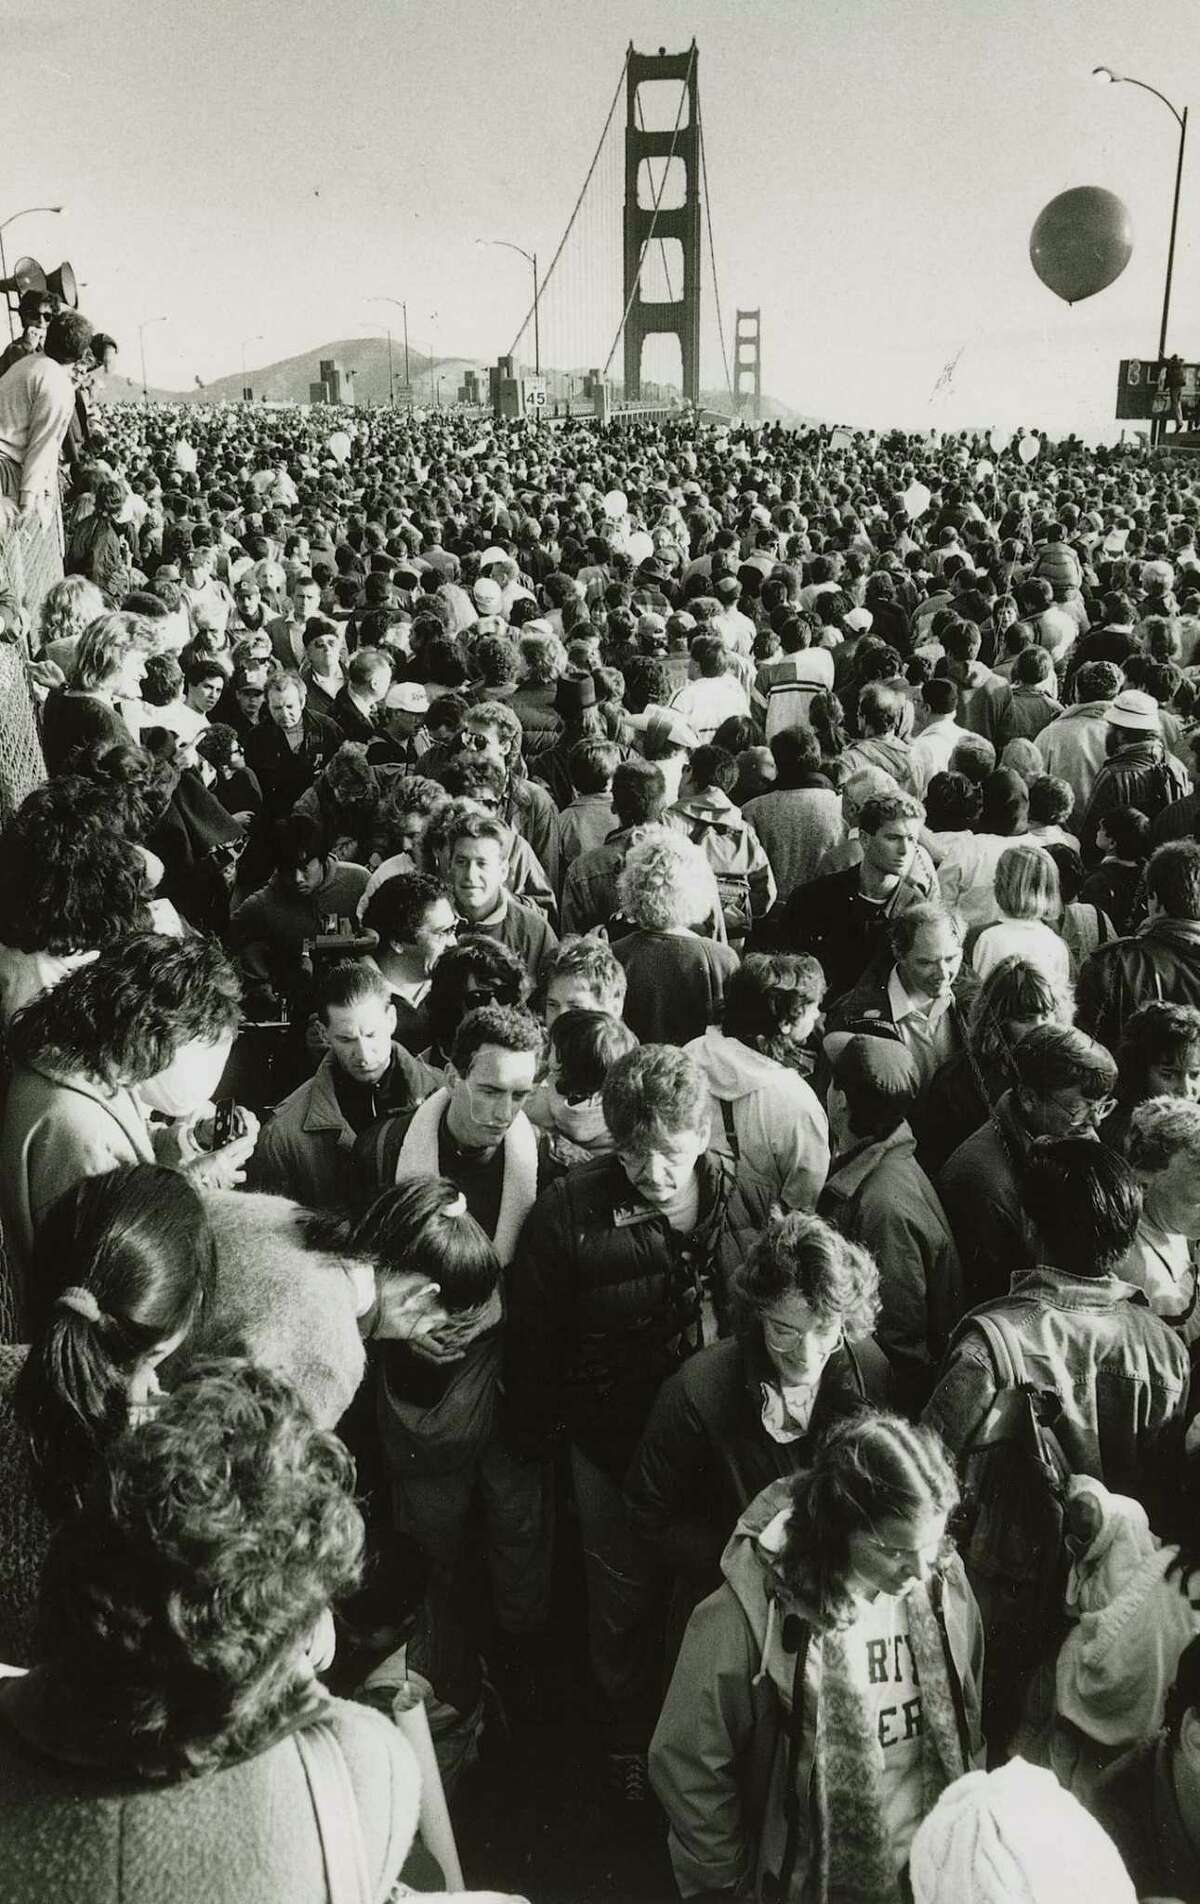 A mass of people gather at the south end of the Golden Gate Bridge for the 50th anniversary celebration on May 24, 1987.